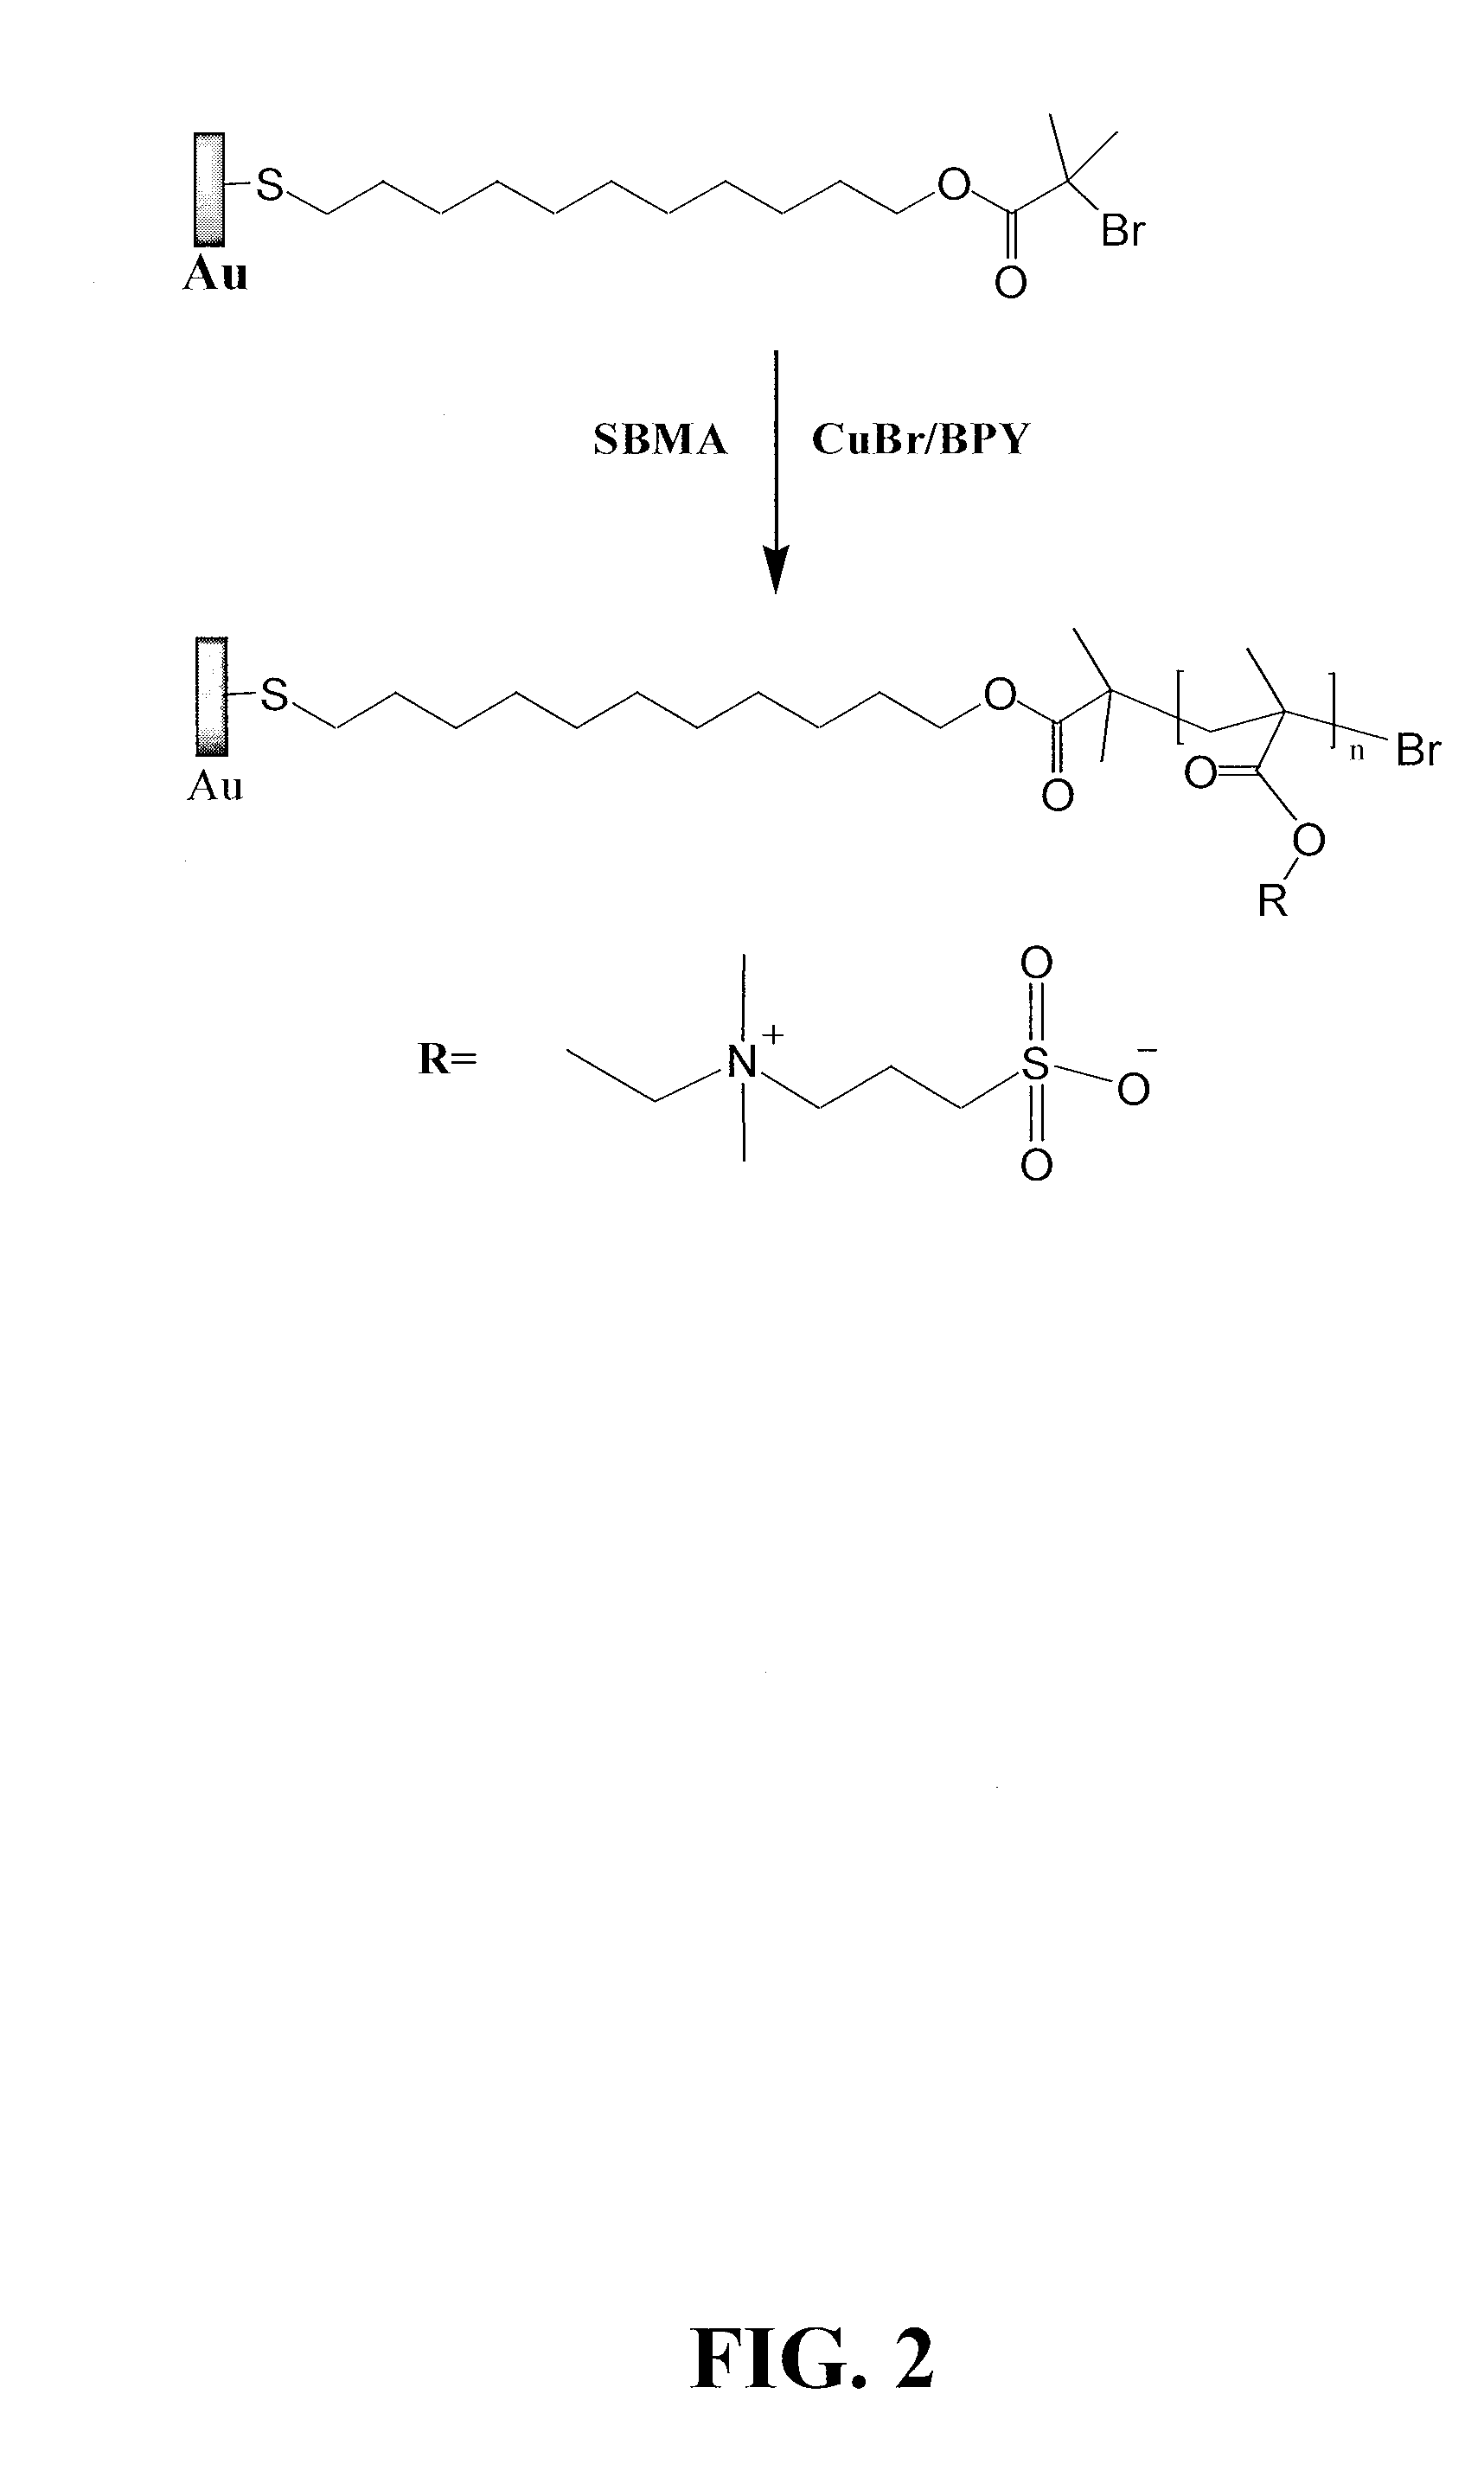 Super-low fouling sulfobetaine and carboxybetaine materials and related methods